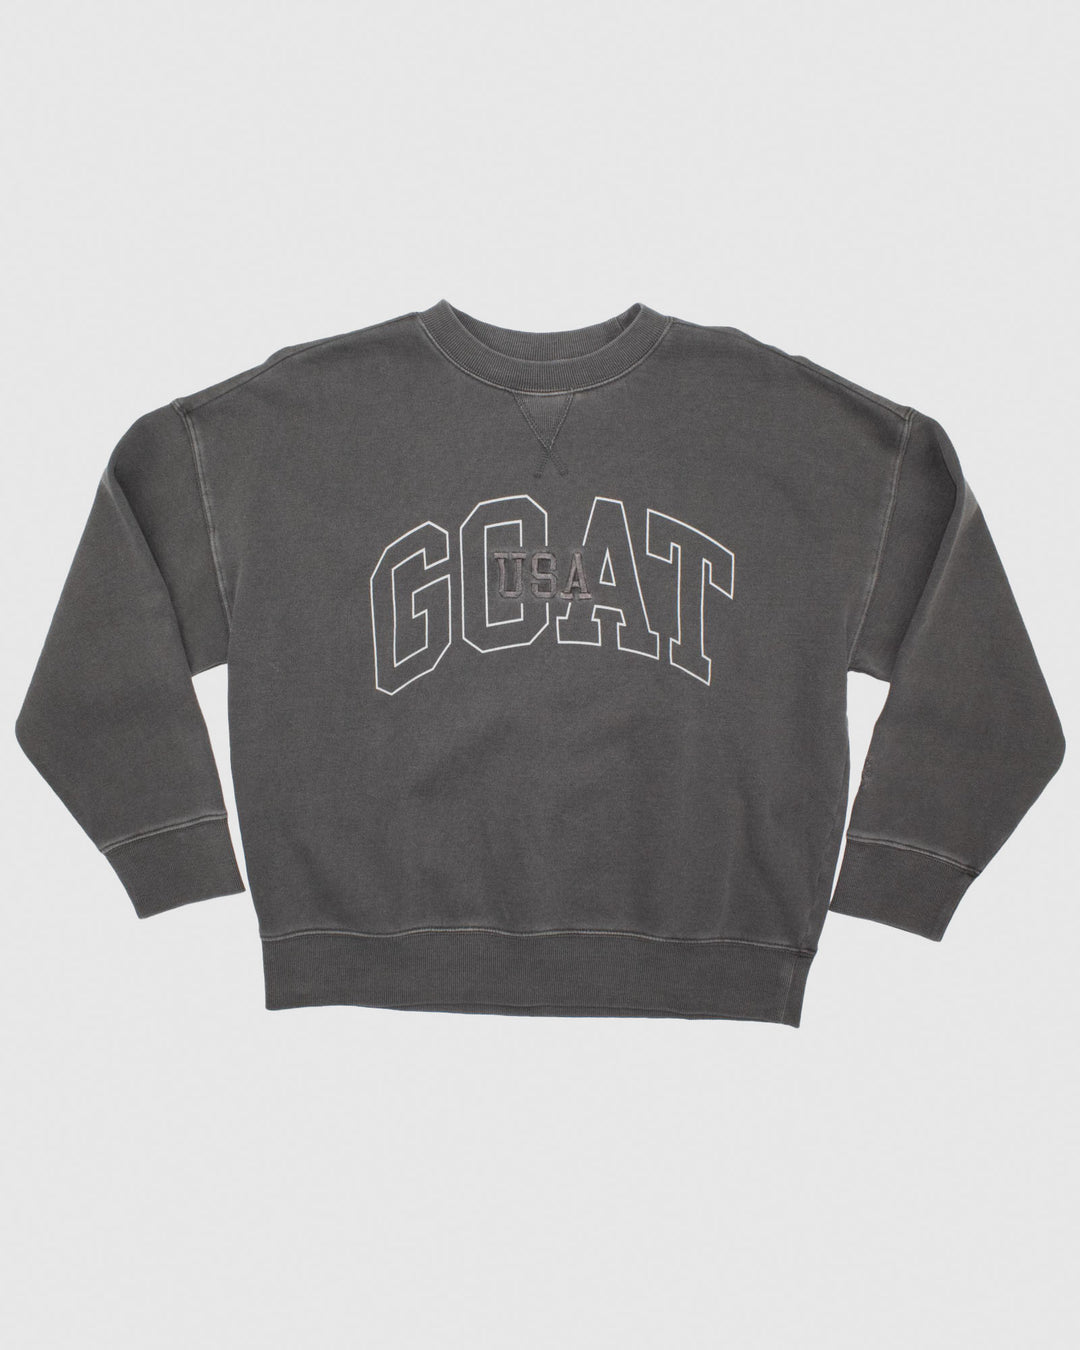 Pepper colored crewneck that reads "GOAT USA"#color_pepper